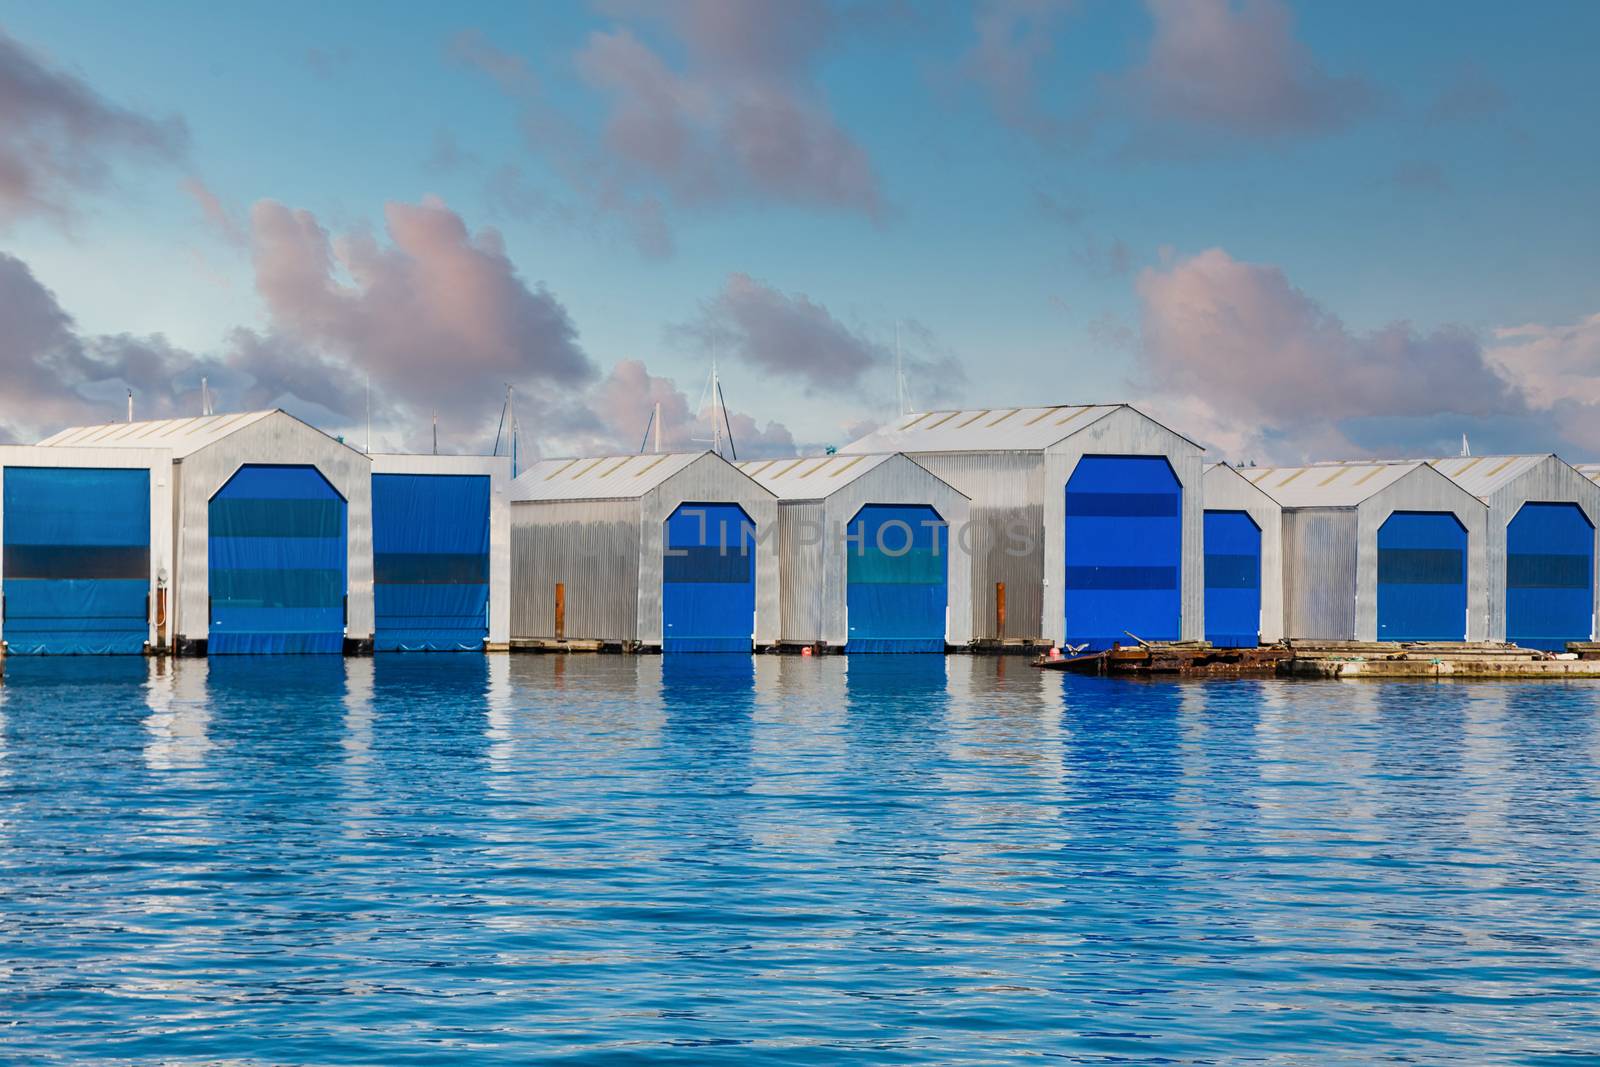 Boat Houses with Blue Doors on Blue Water